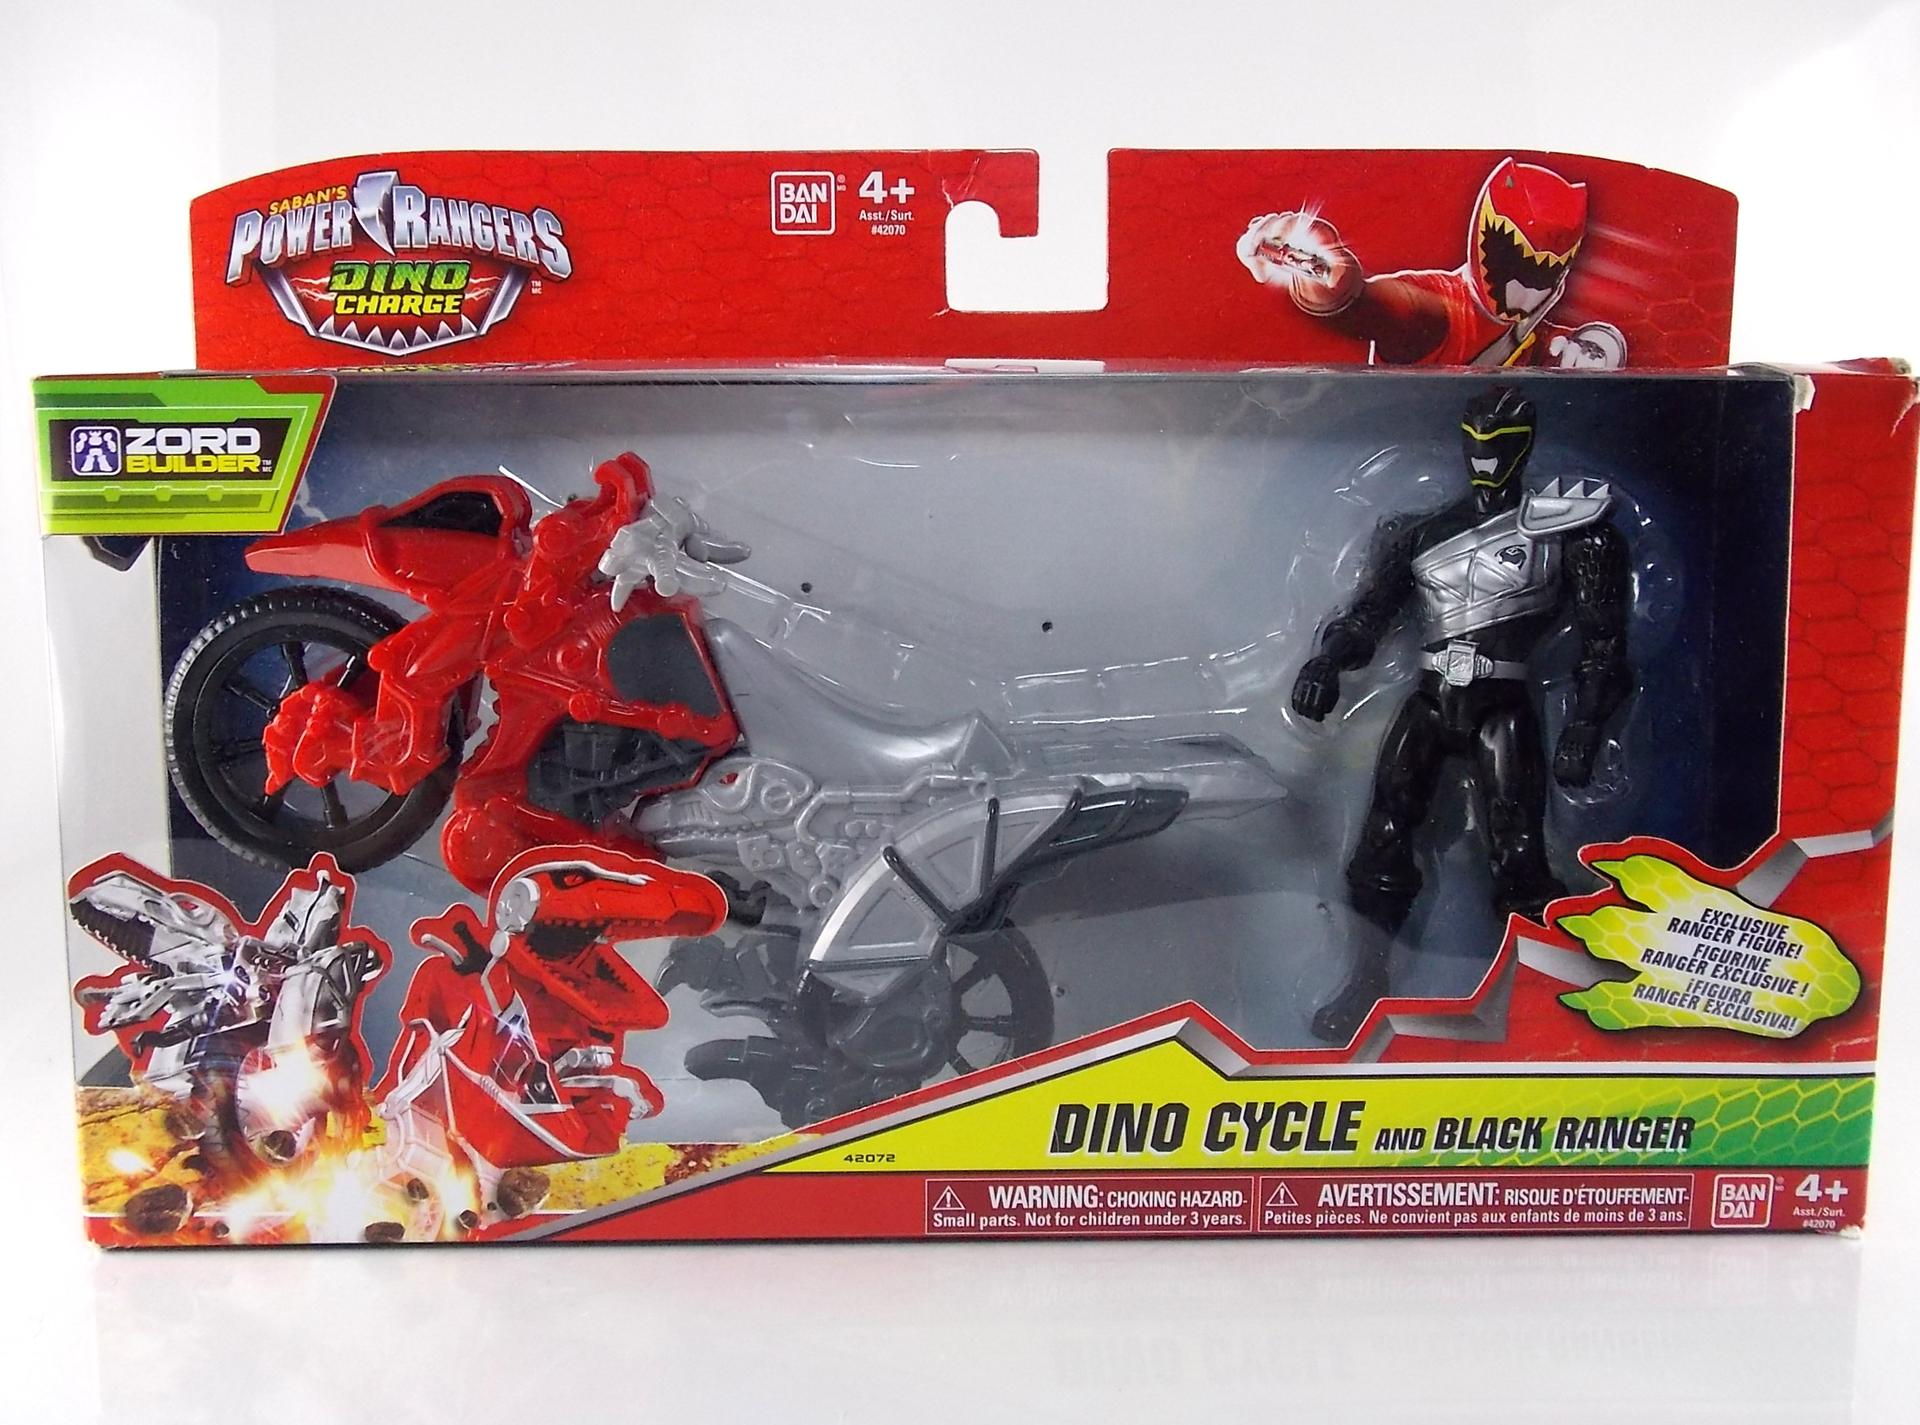 Power Rangers Dino Charge Dino Cycle with 5 Black Ranger Action Figure